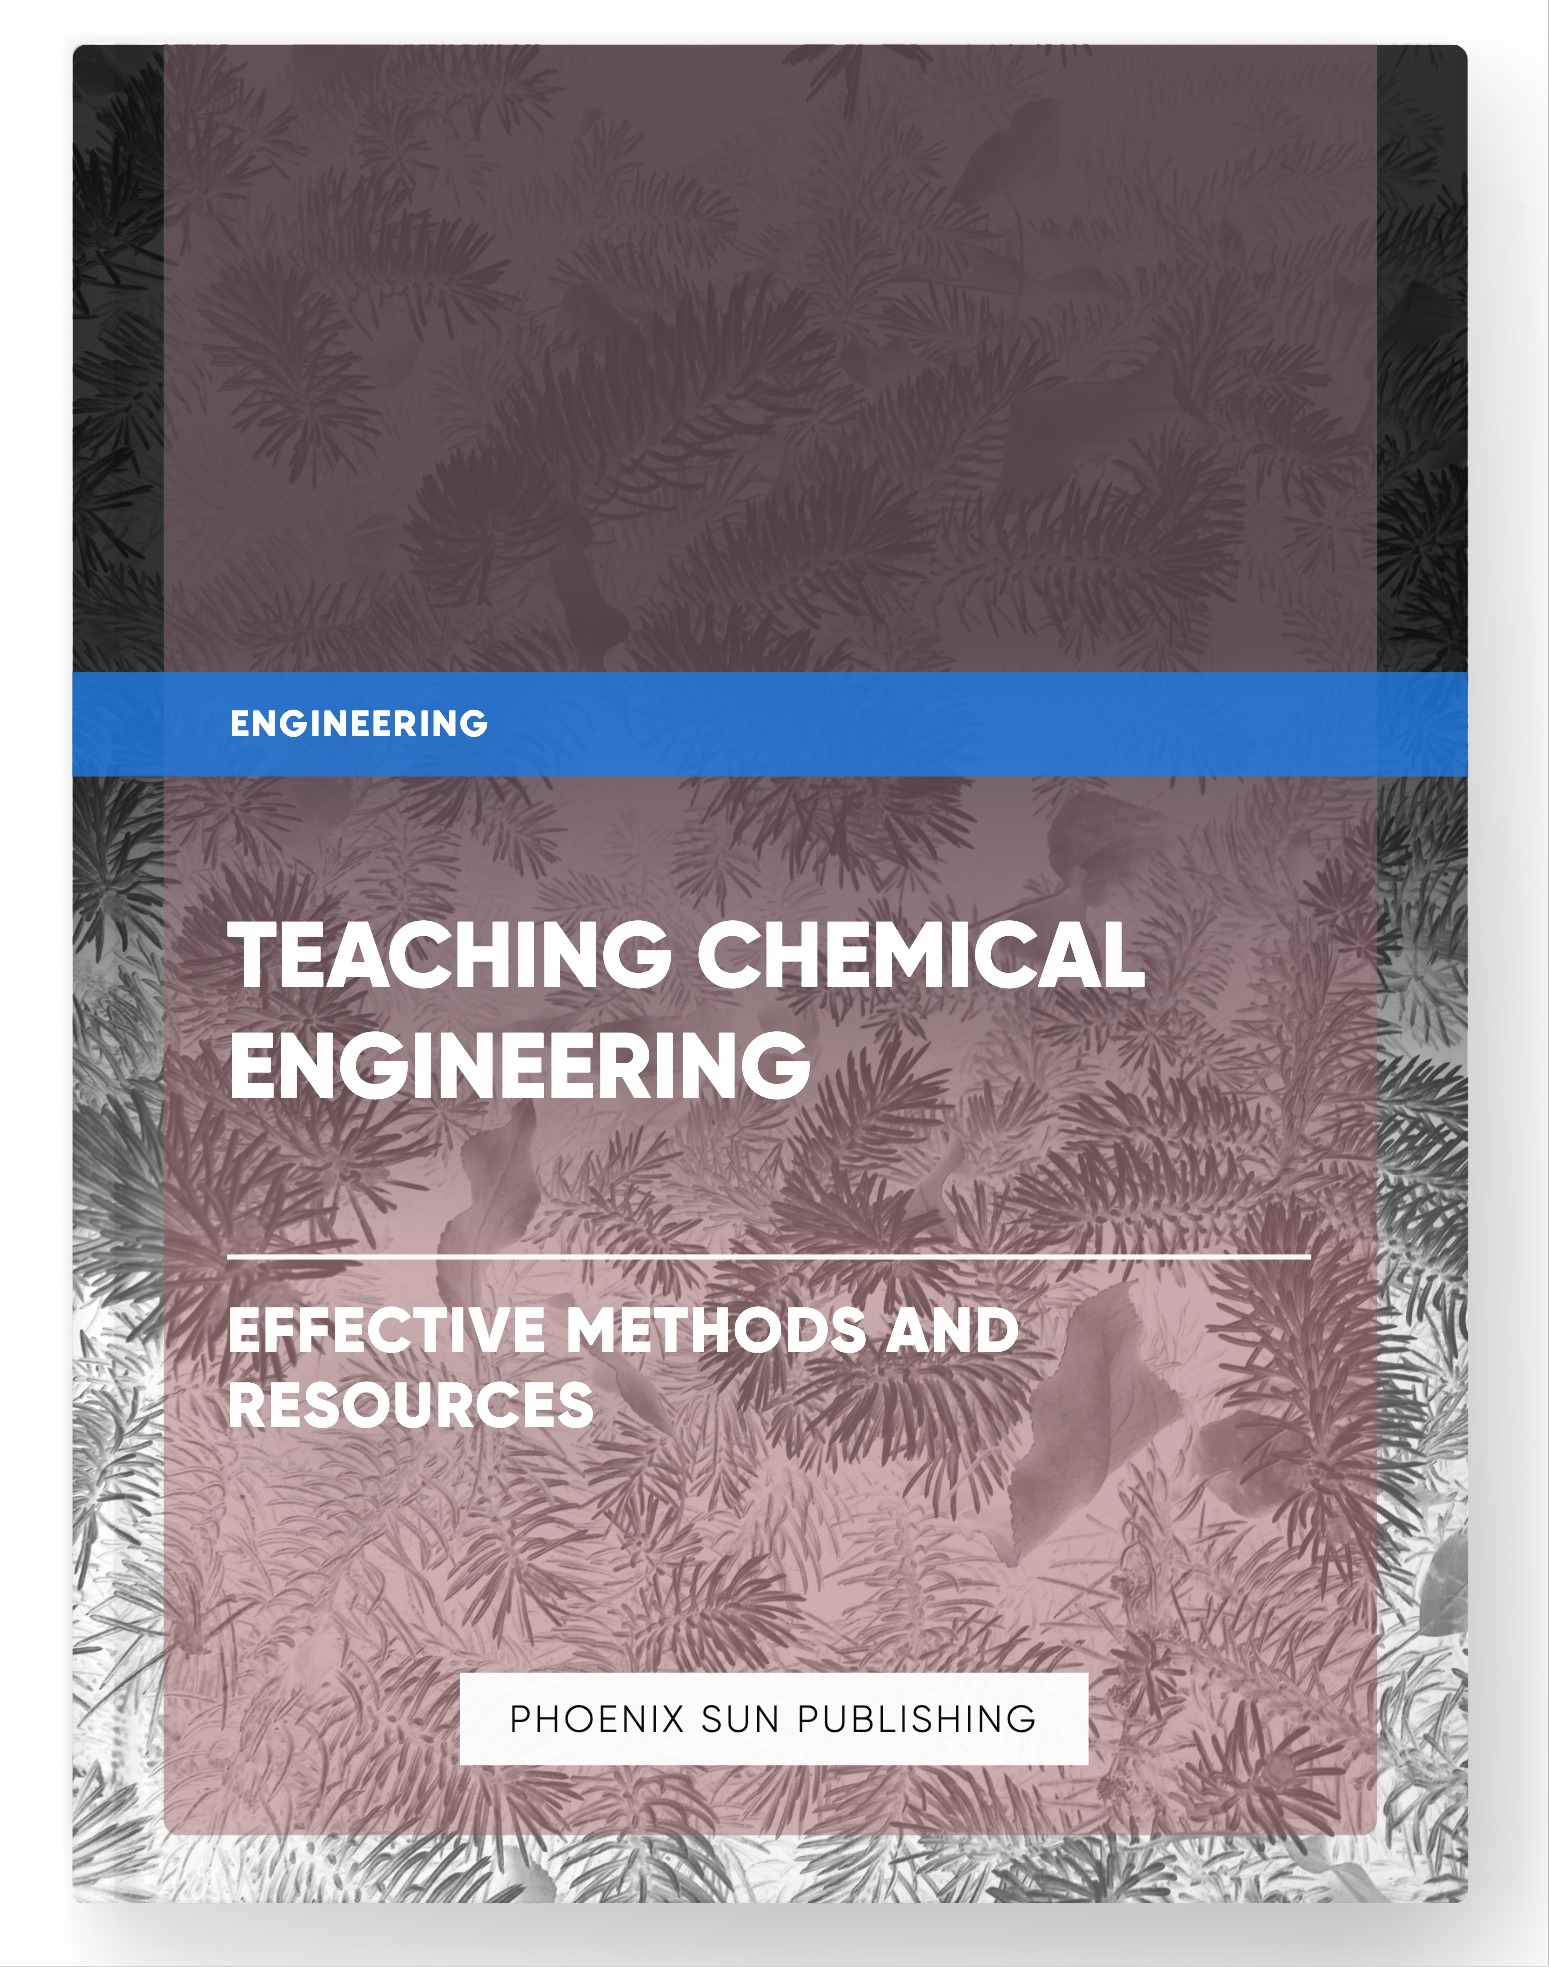 Teaching Chemical Engineering – Effective Methods and Resources